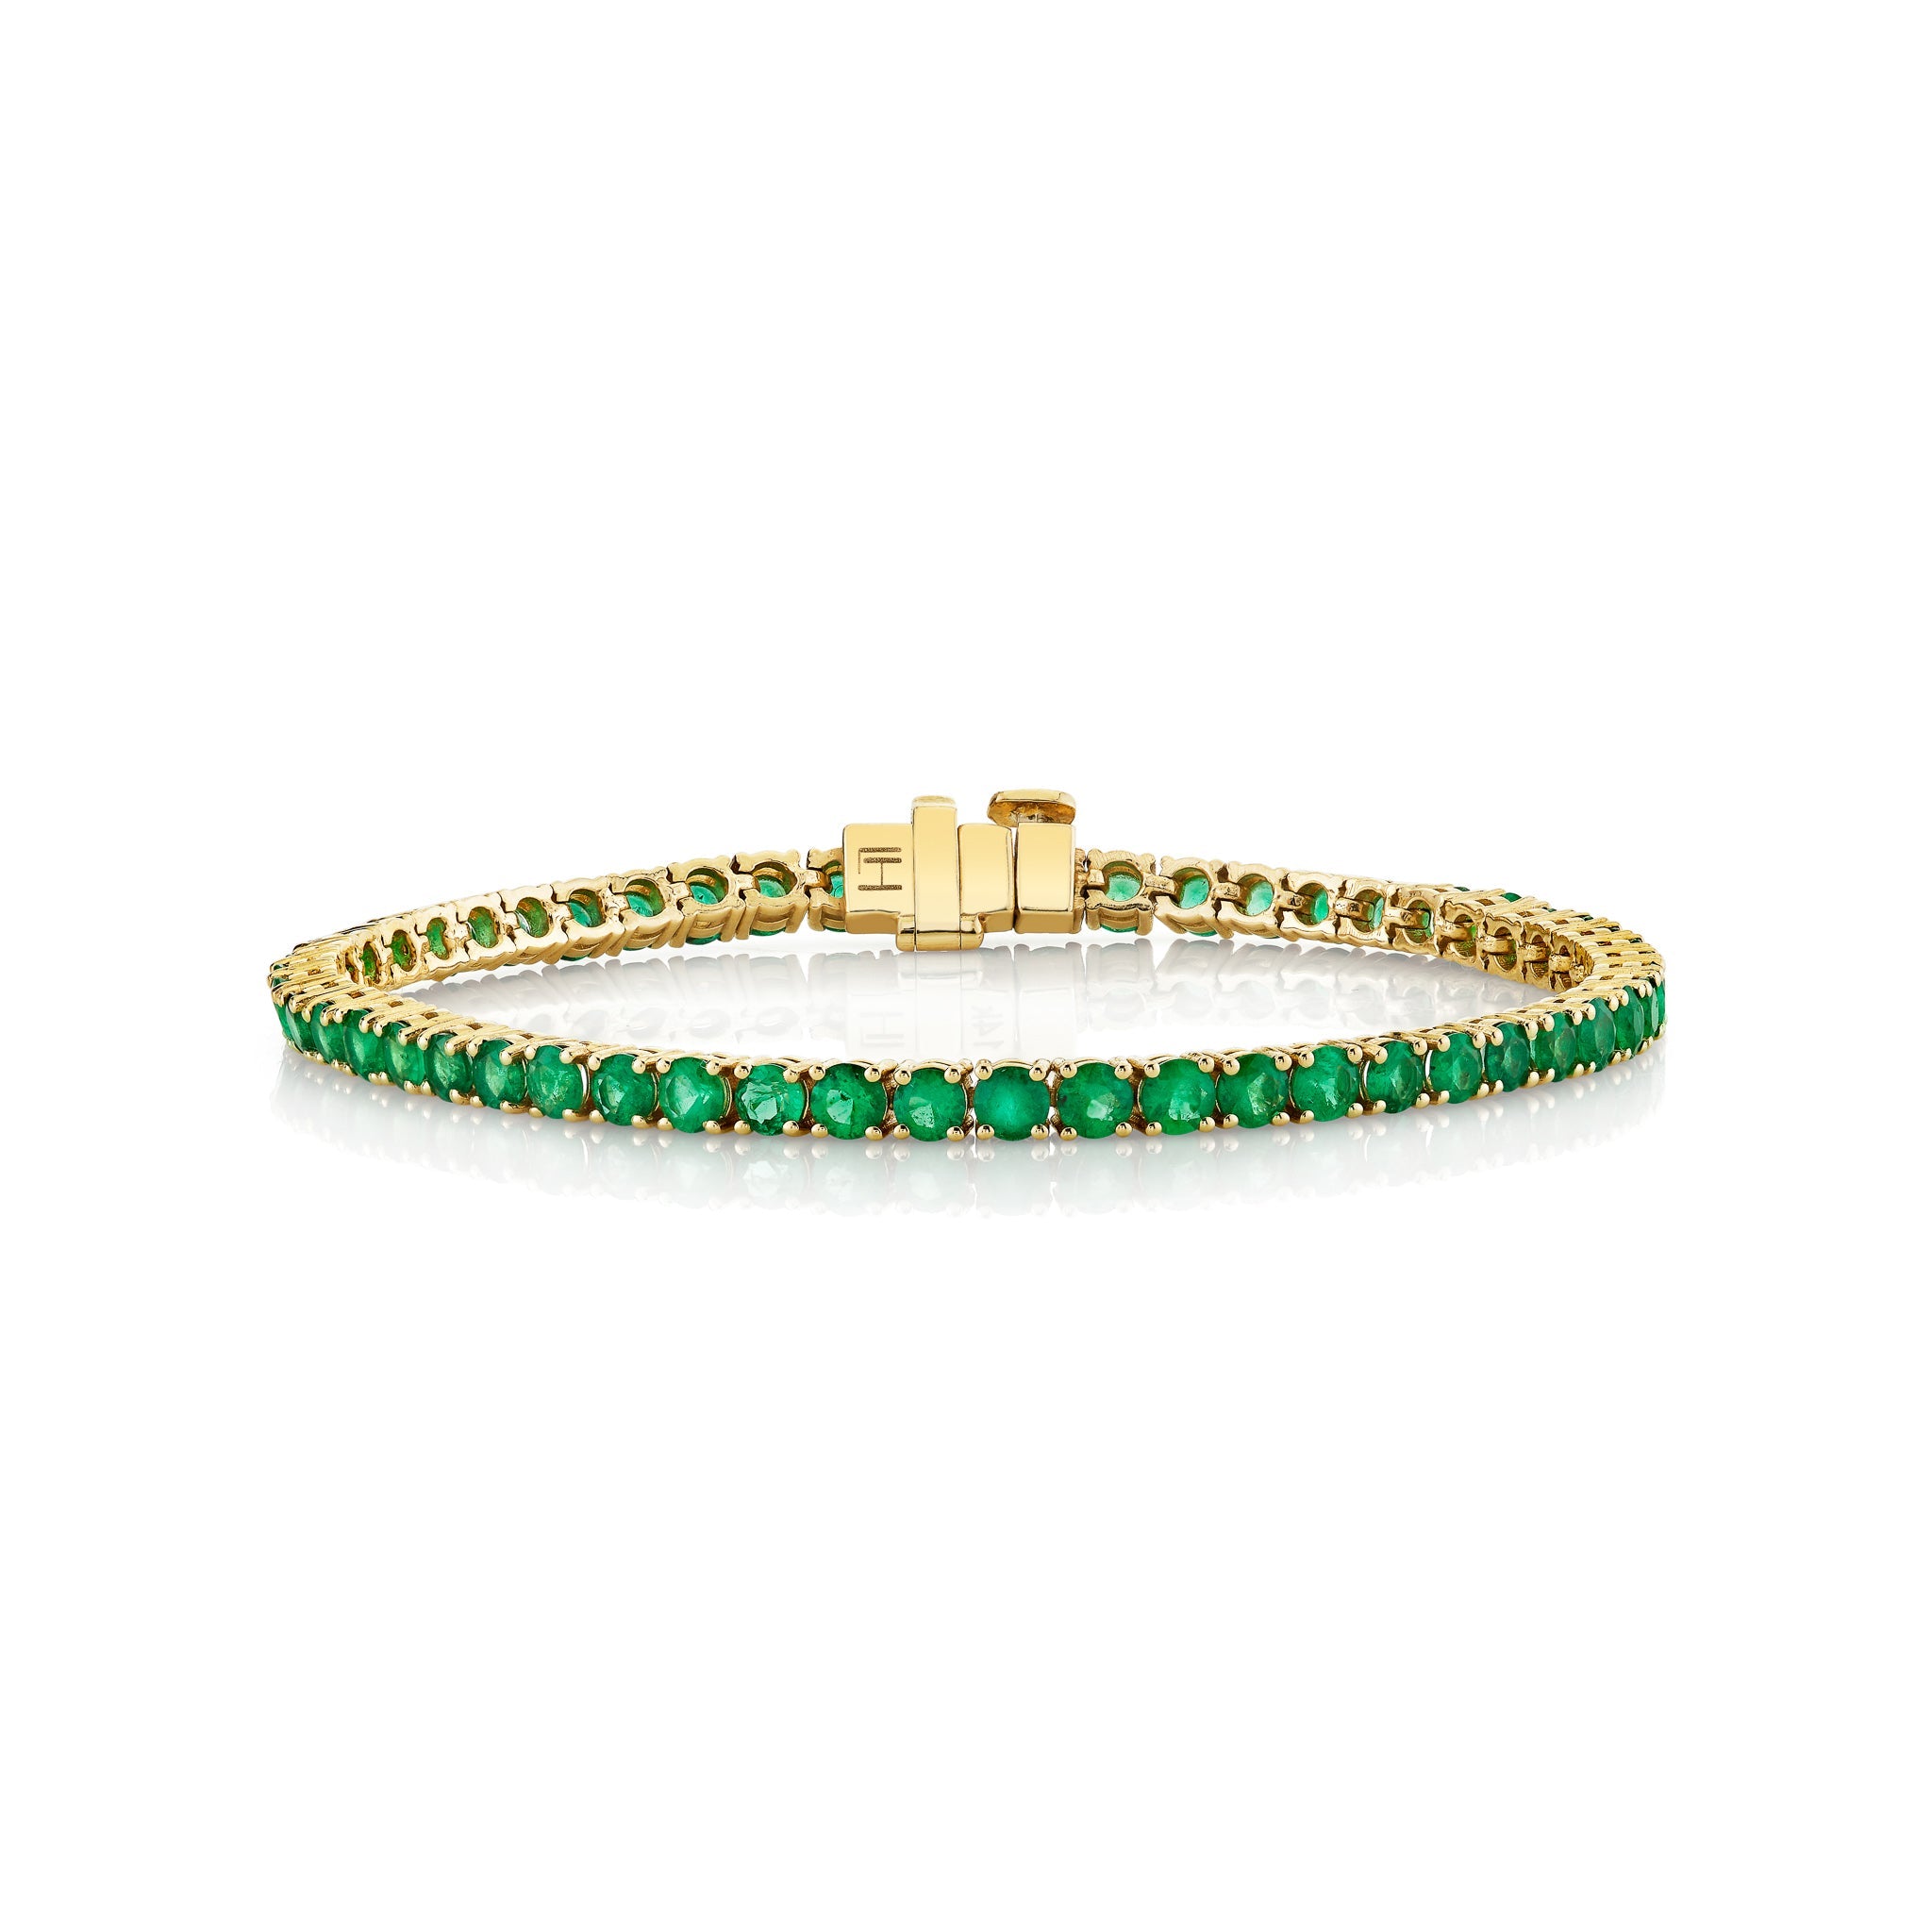 Buy 22K Ruby Emerald Gold Bangles 112VG1257 Online from Vaibhav Jewellers